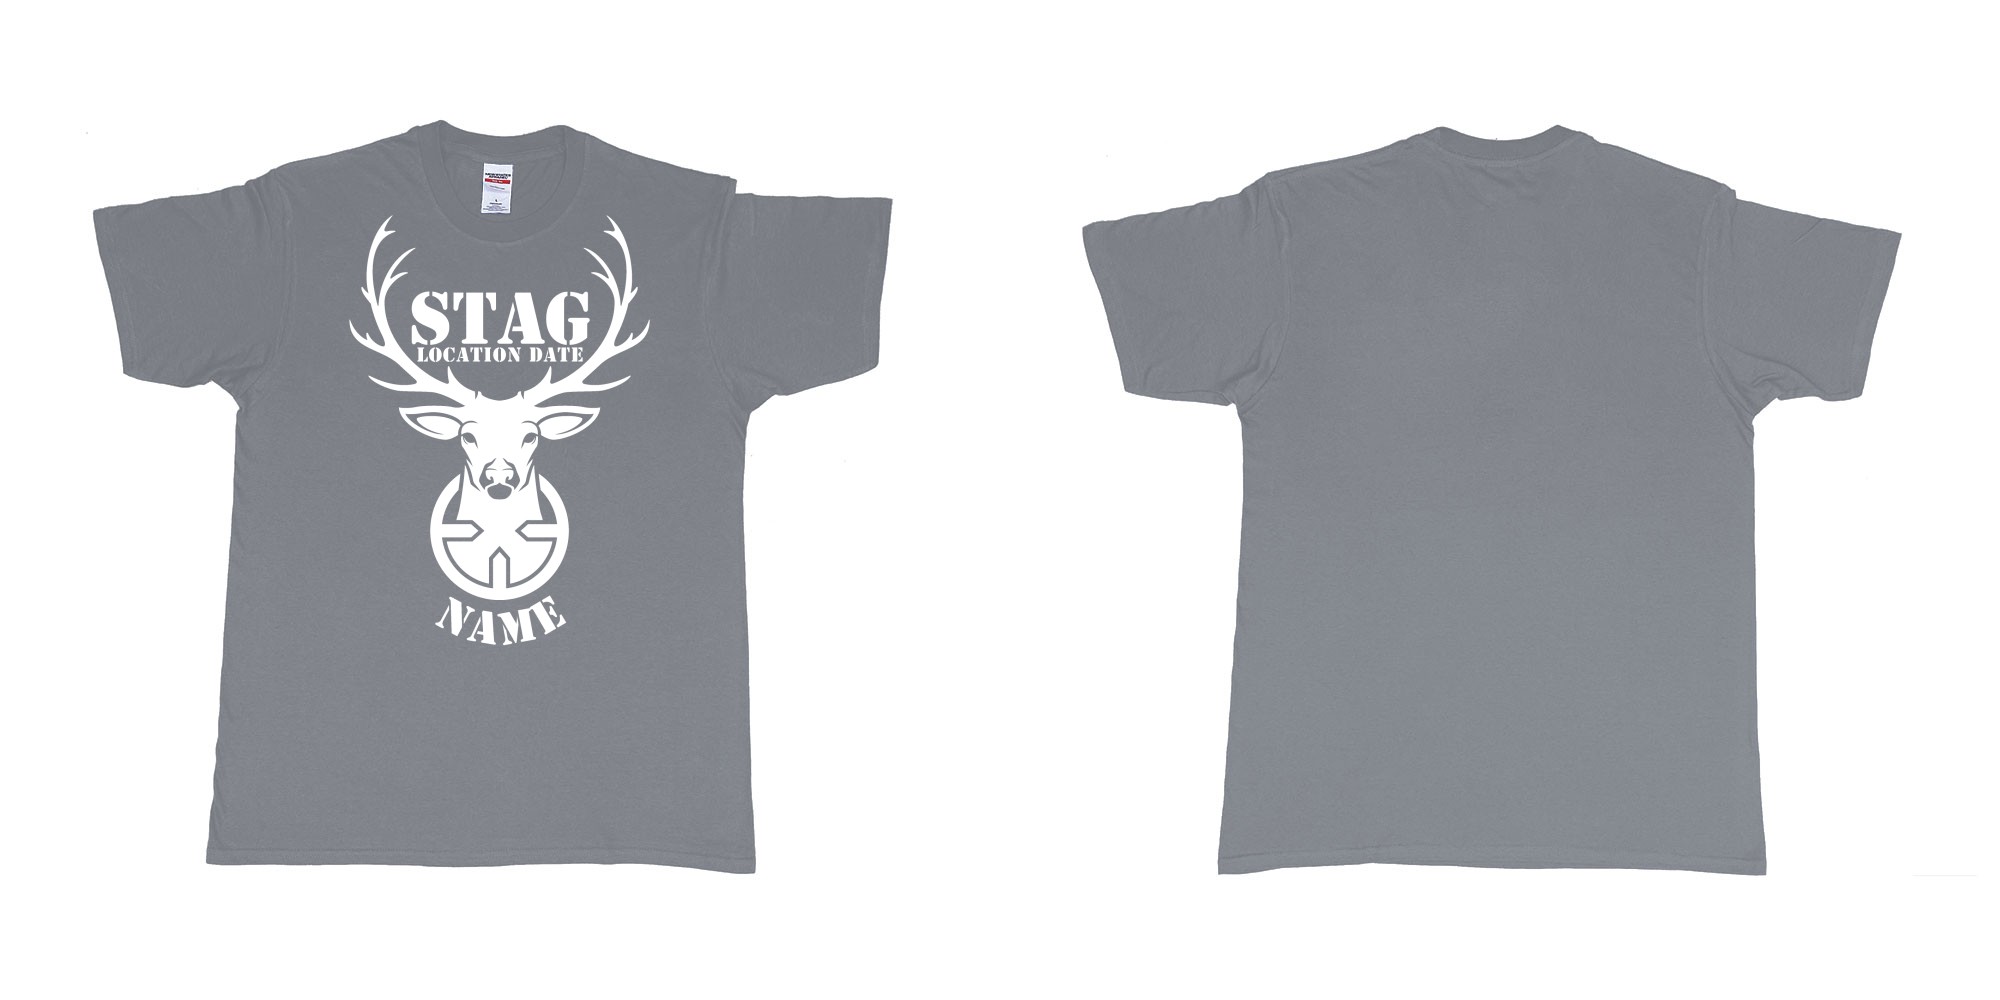 Custom tshirt design aiming for a stag custom tshirt print in fabric color misty choice your own text made in Bali by The Pirate Way